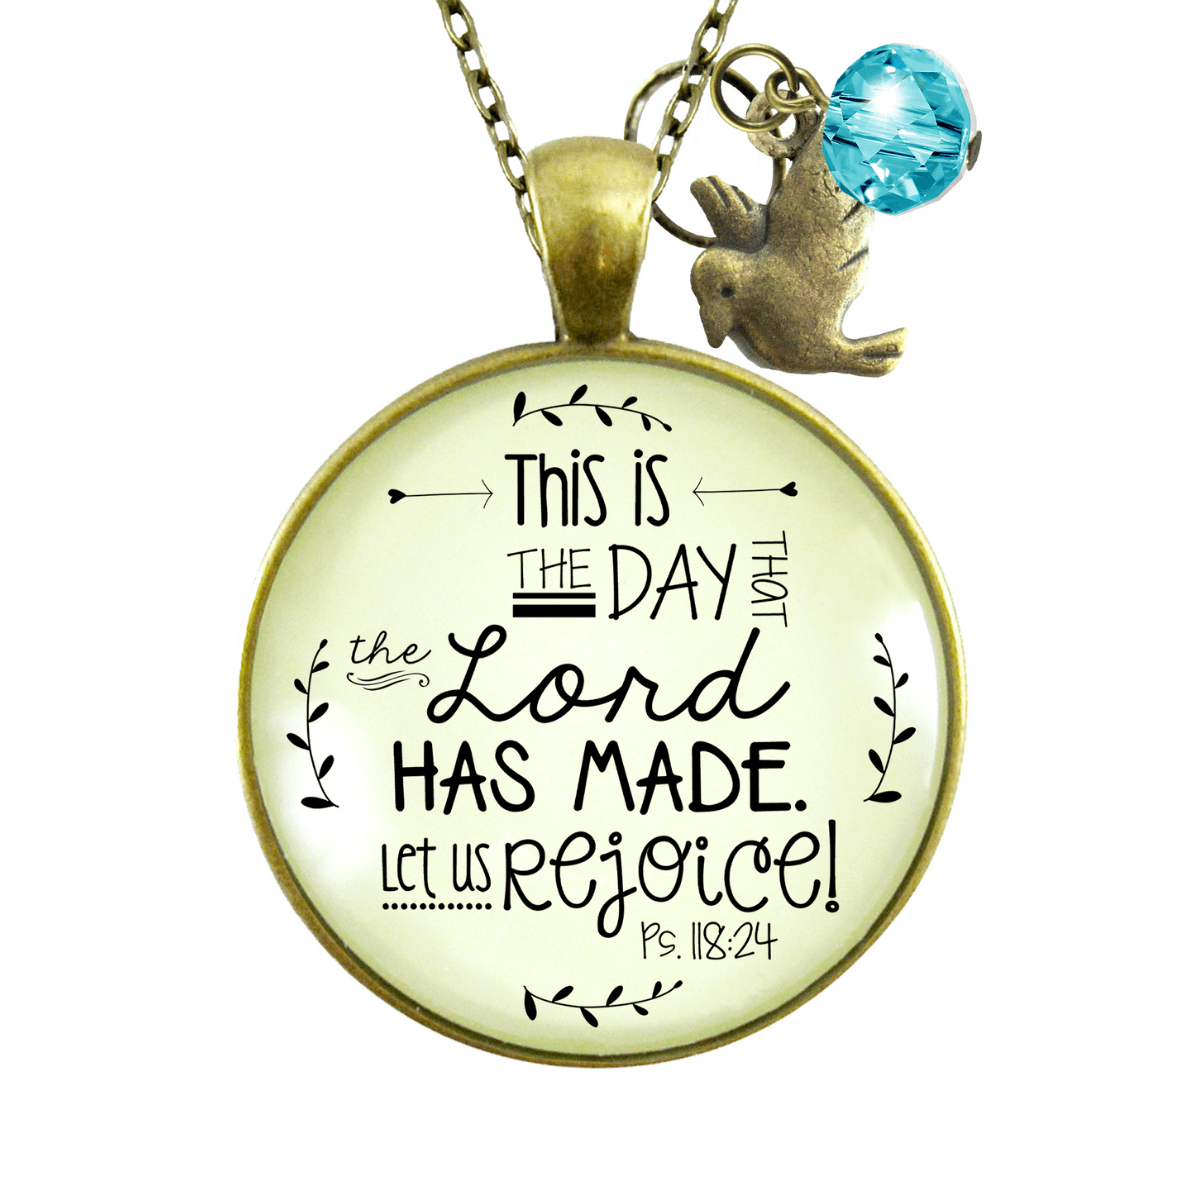 Gutsy Goodness This is the Day Necklace Lord Made Christian Quote Faith Jewelry - Gutsy Goodness;This Is The Day Necklace Lord Made Christian Quote Faith Jewelry - Gutsy Goodness Handmade Jewelry Gifts